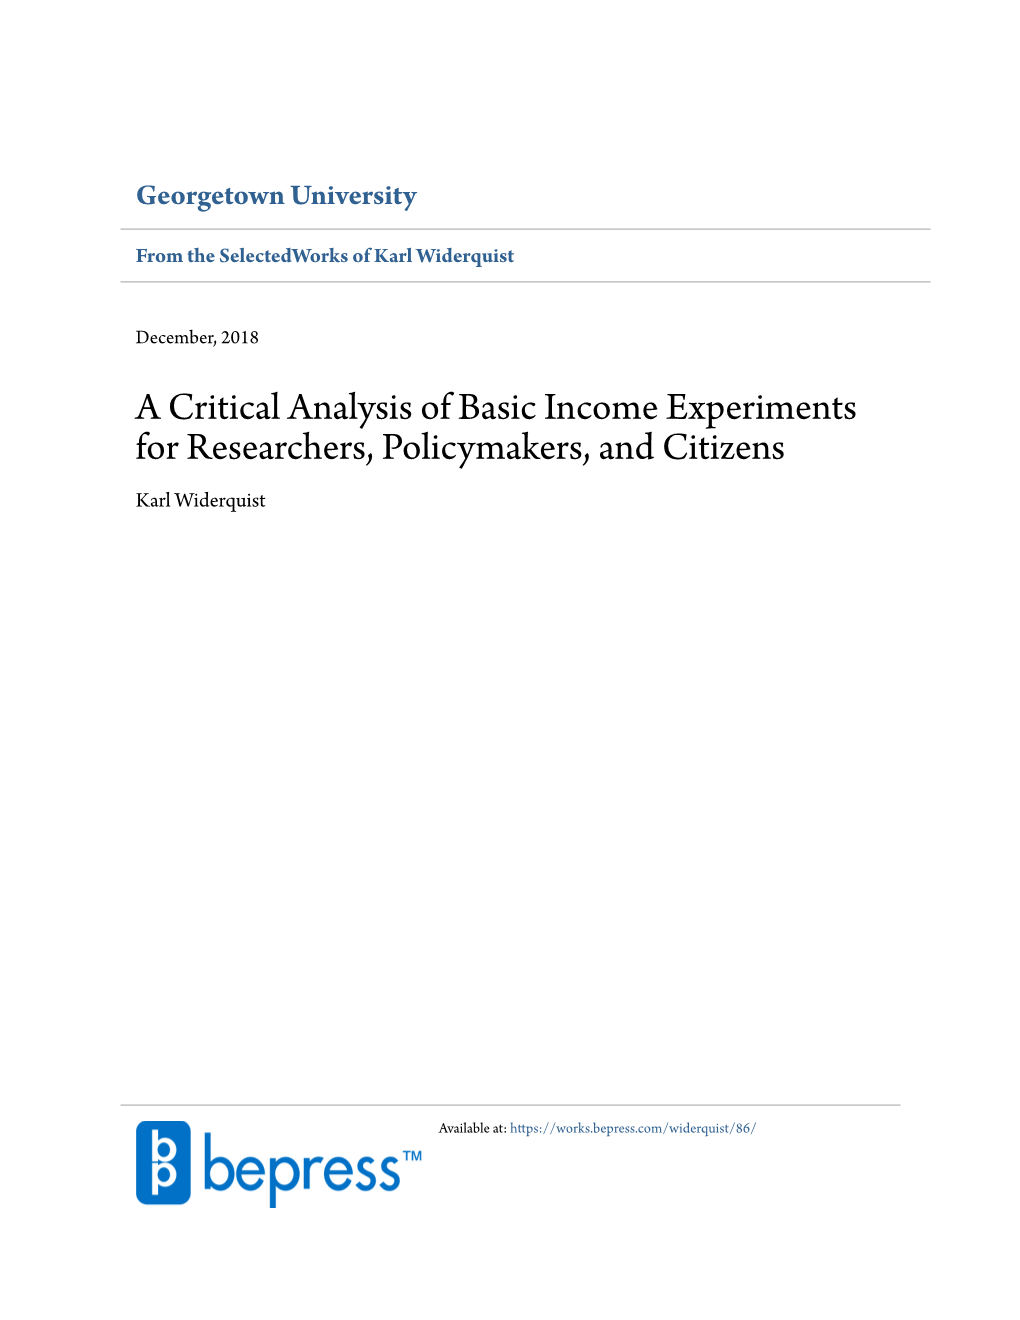 A Critical Analysis of Basic Income Experiments for Researchers, Policymakers, and Citizens Karl Widerquist